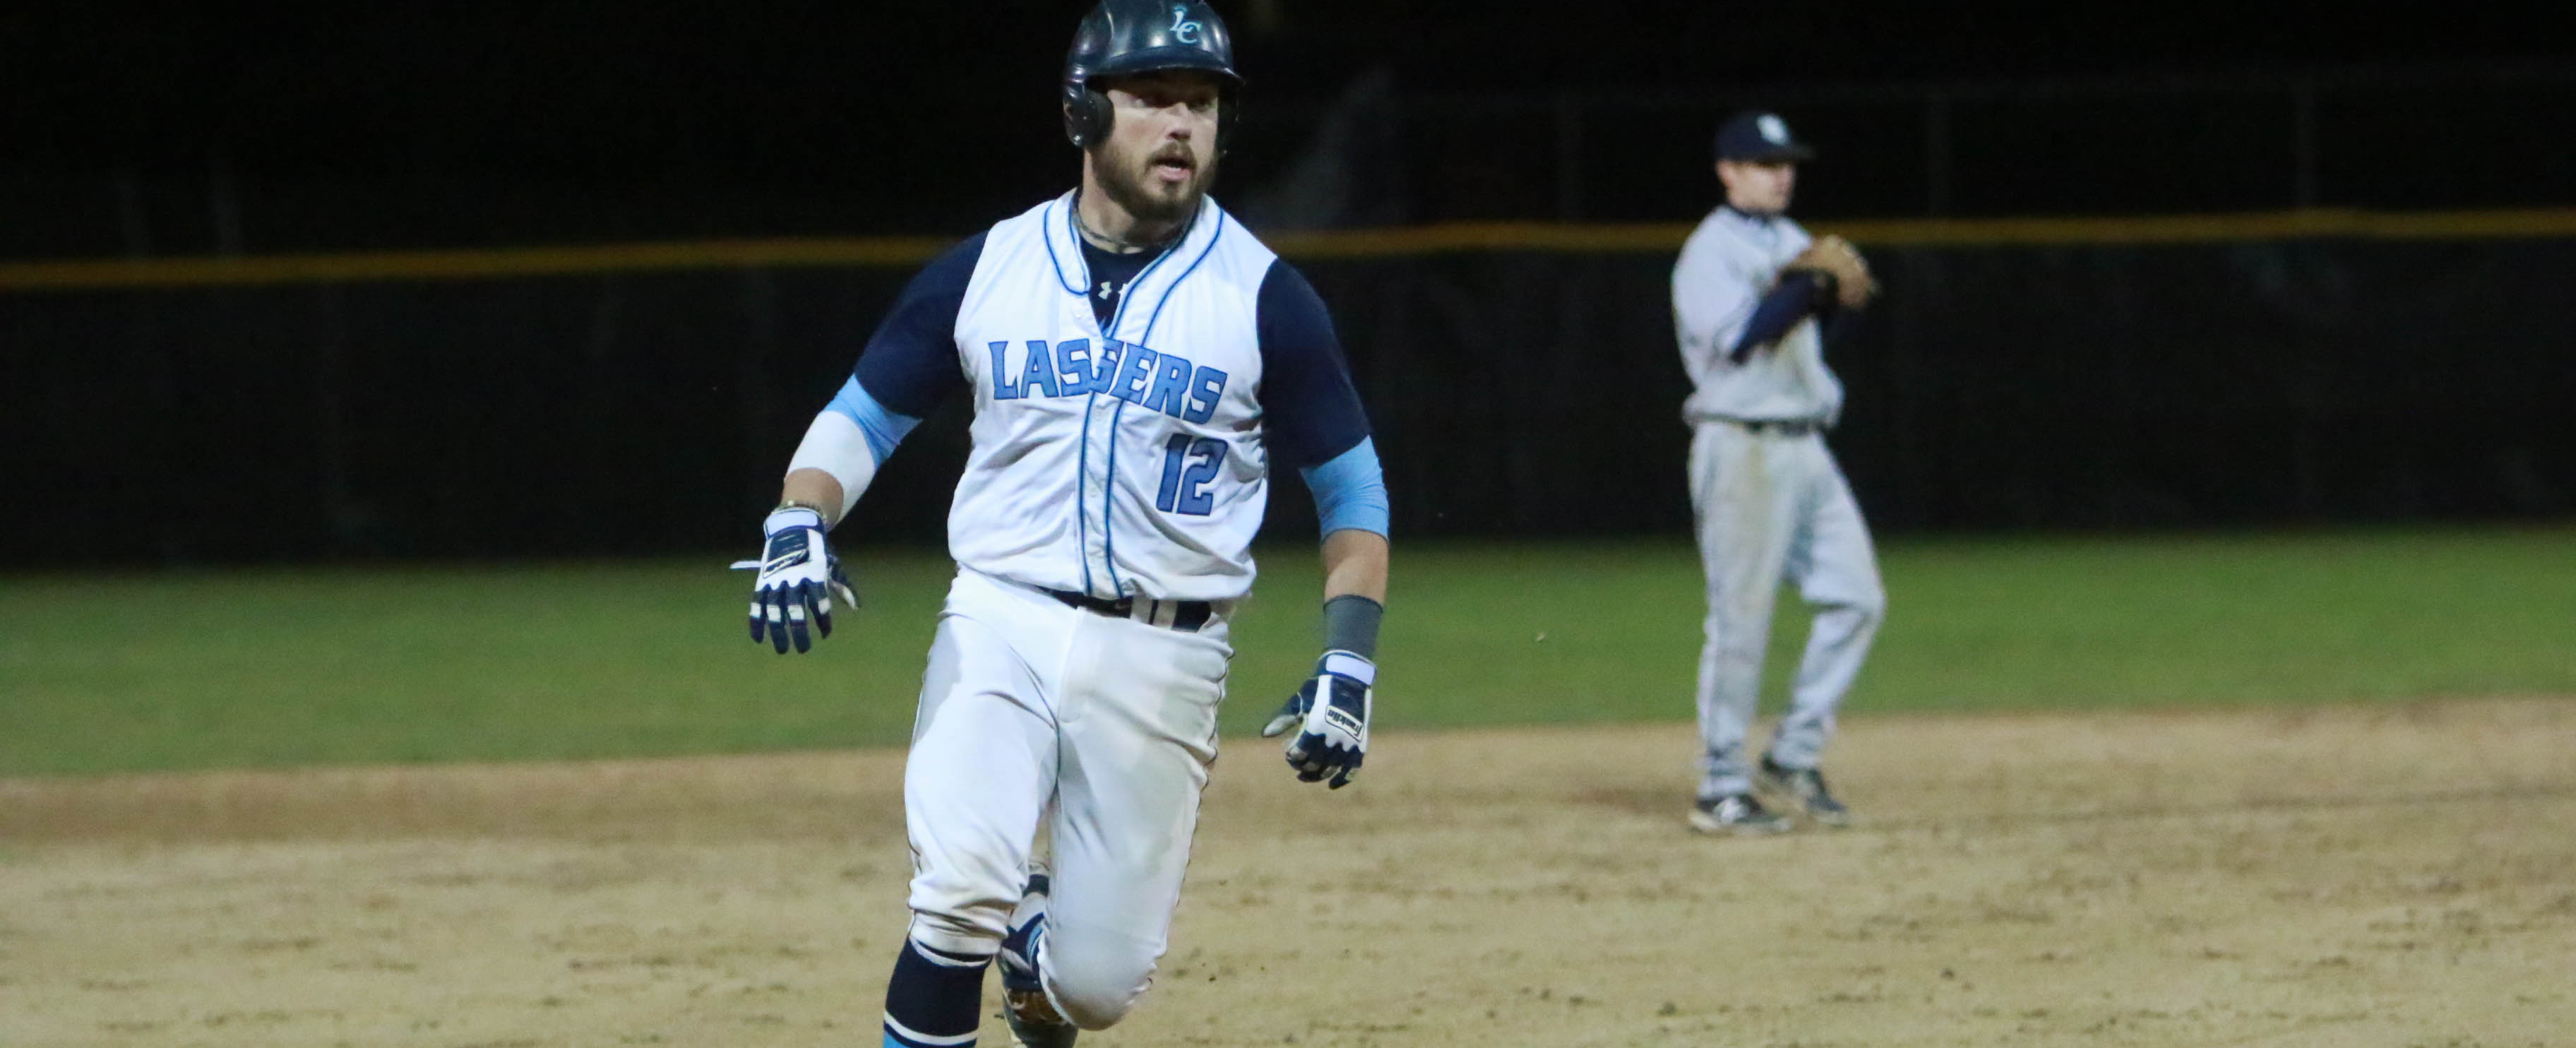 Baseball Splits with JWU in Conference Clash; Hurty Records 100th Career Hit